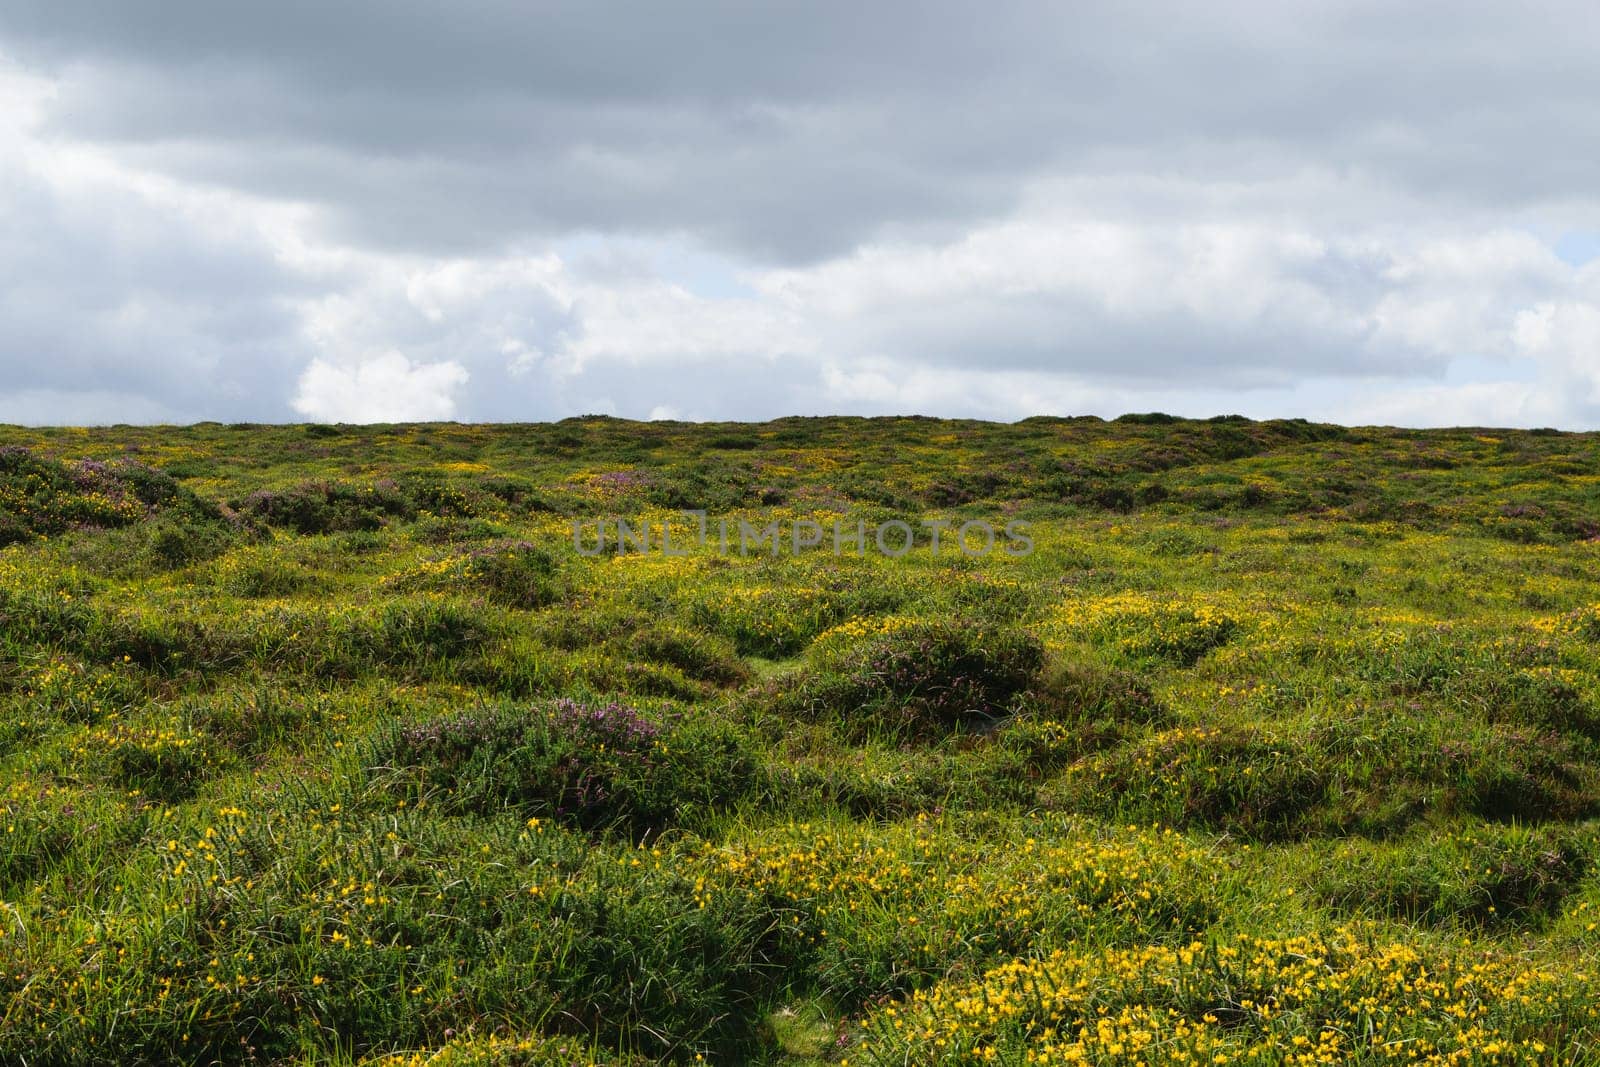 A vast field covered with green grass and yellow wildflowers under a cloudy sky.